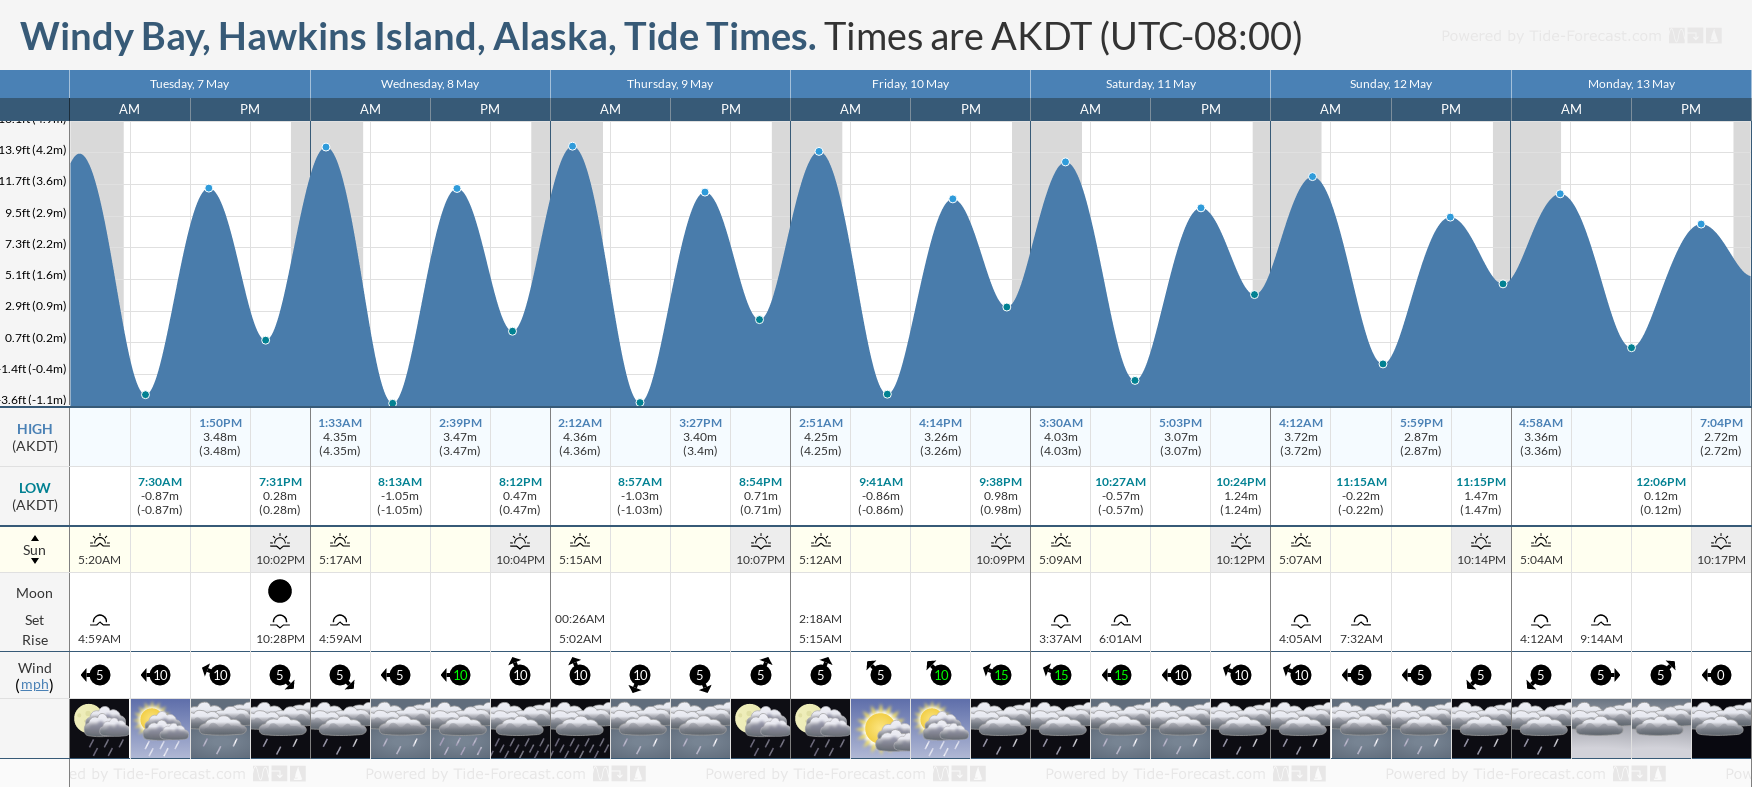 Windy Bay, Hawkins Island, Alaska Tide Chart including high and low tide tide times for the next 7 days